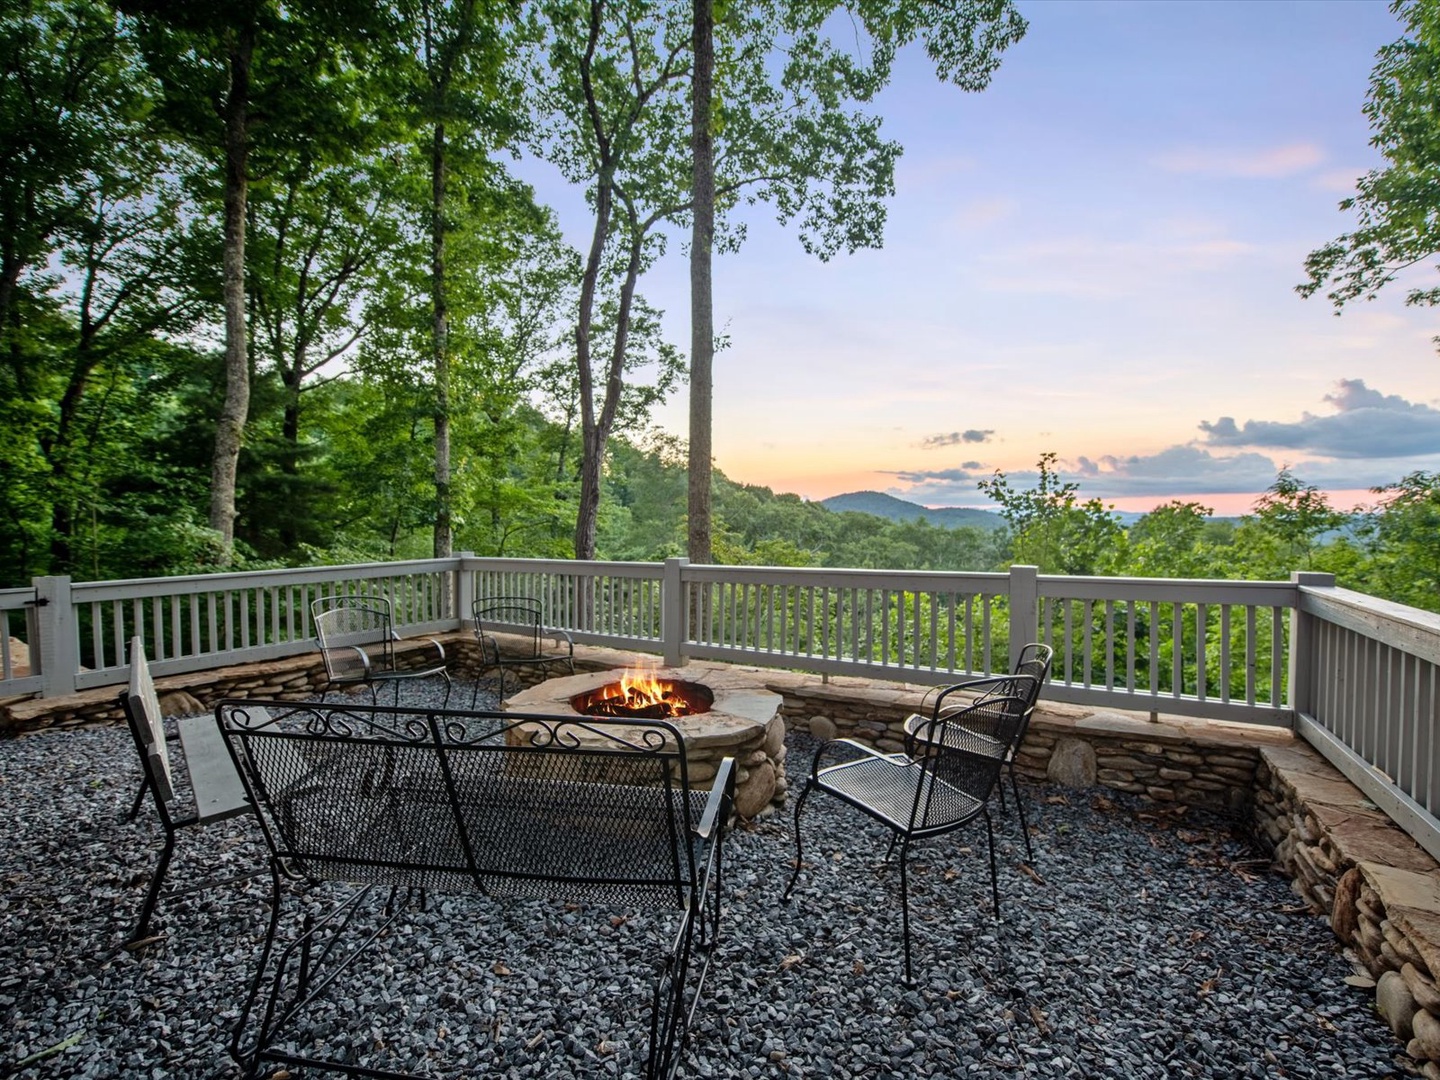 Aska Bliss- Stone firepit with the mountain view and outdoor seating